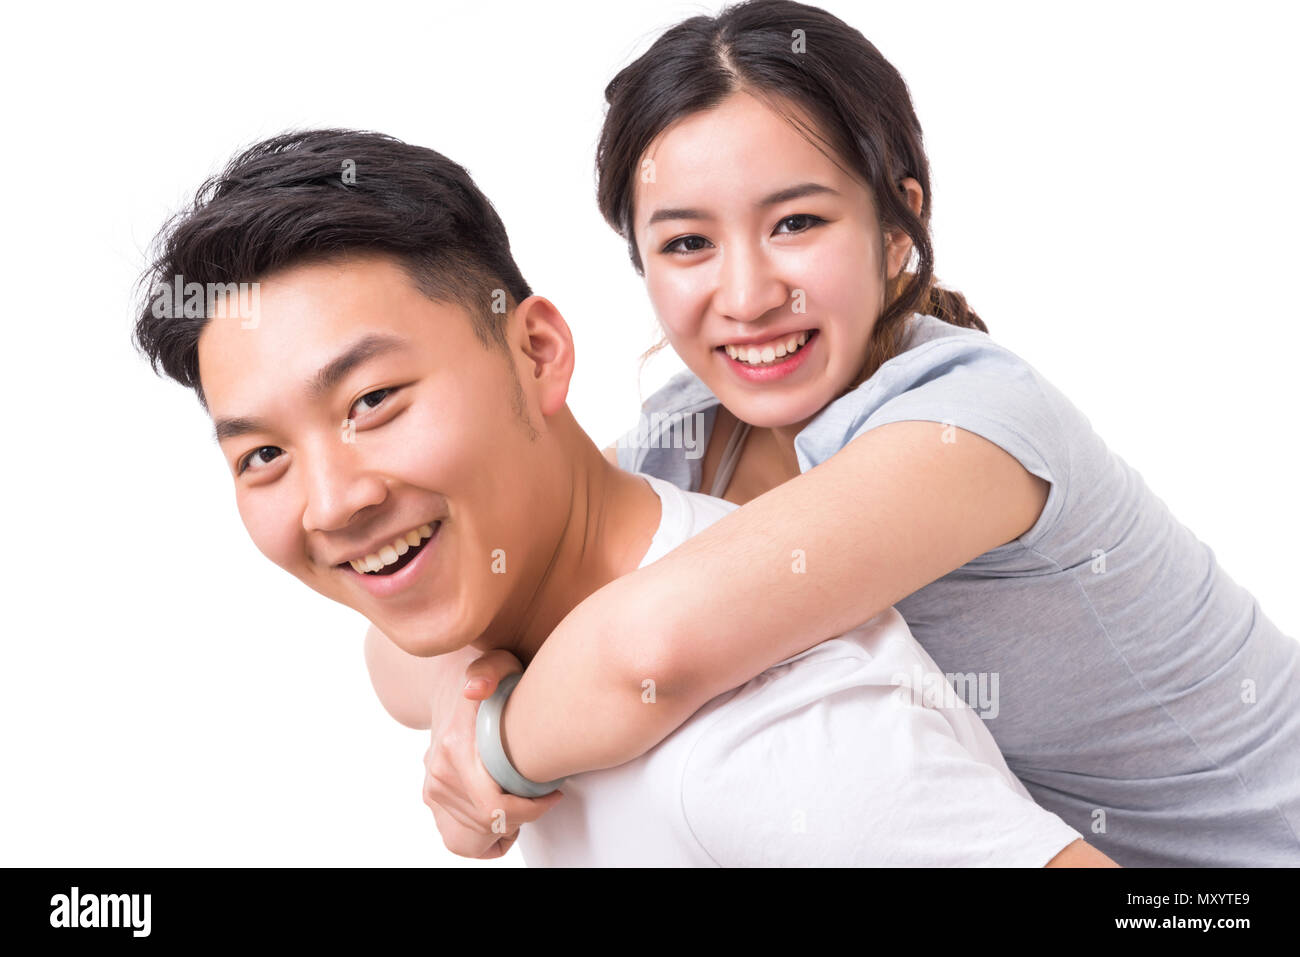 Portrait of young happy smiling couple. Stock Photo